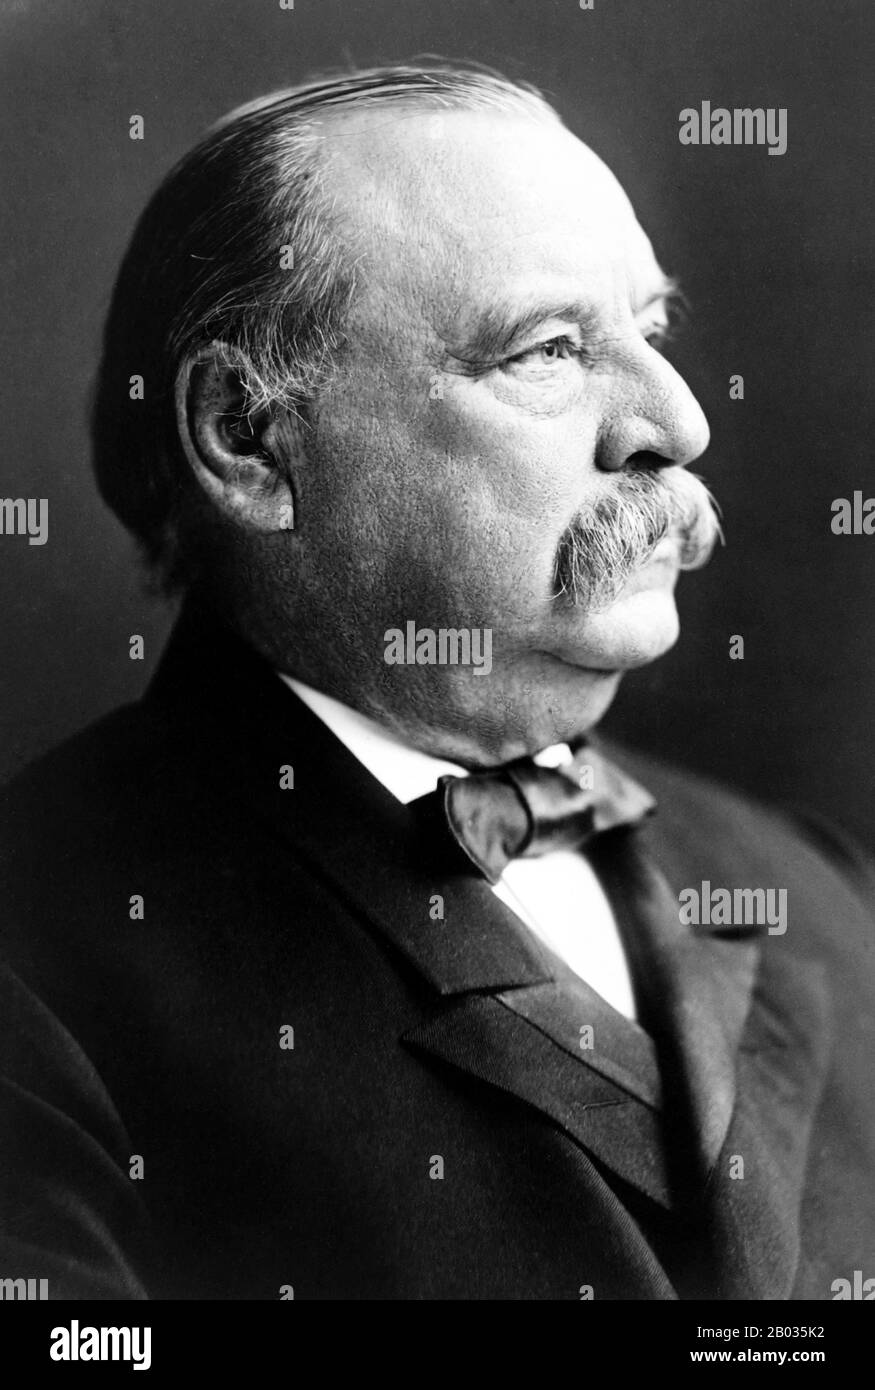 Stephen Grover Cleveland (March 18, 1837 – June 24, 1908) was an American politician and lawyer who served as the 22nd and 24th President of the United States. He won the popular vote for three presidential elections – in 1884, 1888, and 1892 – and was one of the three Democrats (with Andrew Johnson and Woodrow Wilson) to serve as president during the era of Republican political domination dating from 1861 to 1933.  He was also the first and only President in American history to serve two non-consecutive terms in office. Stock Photo